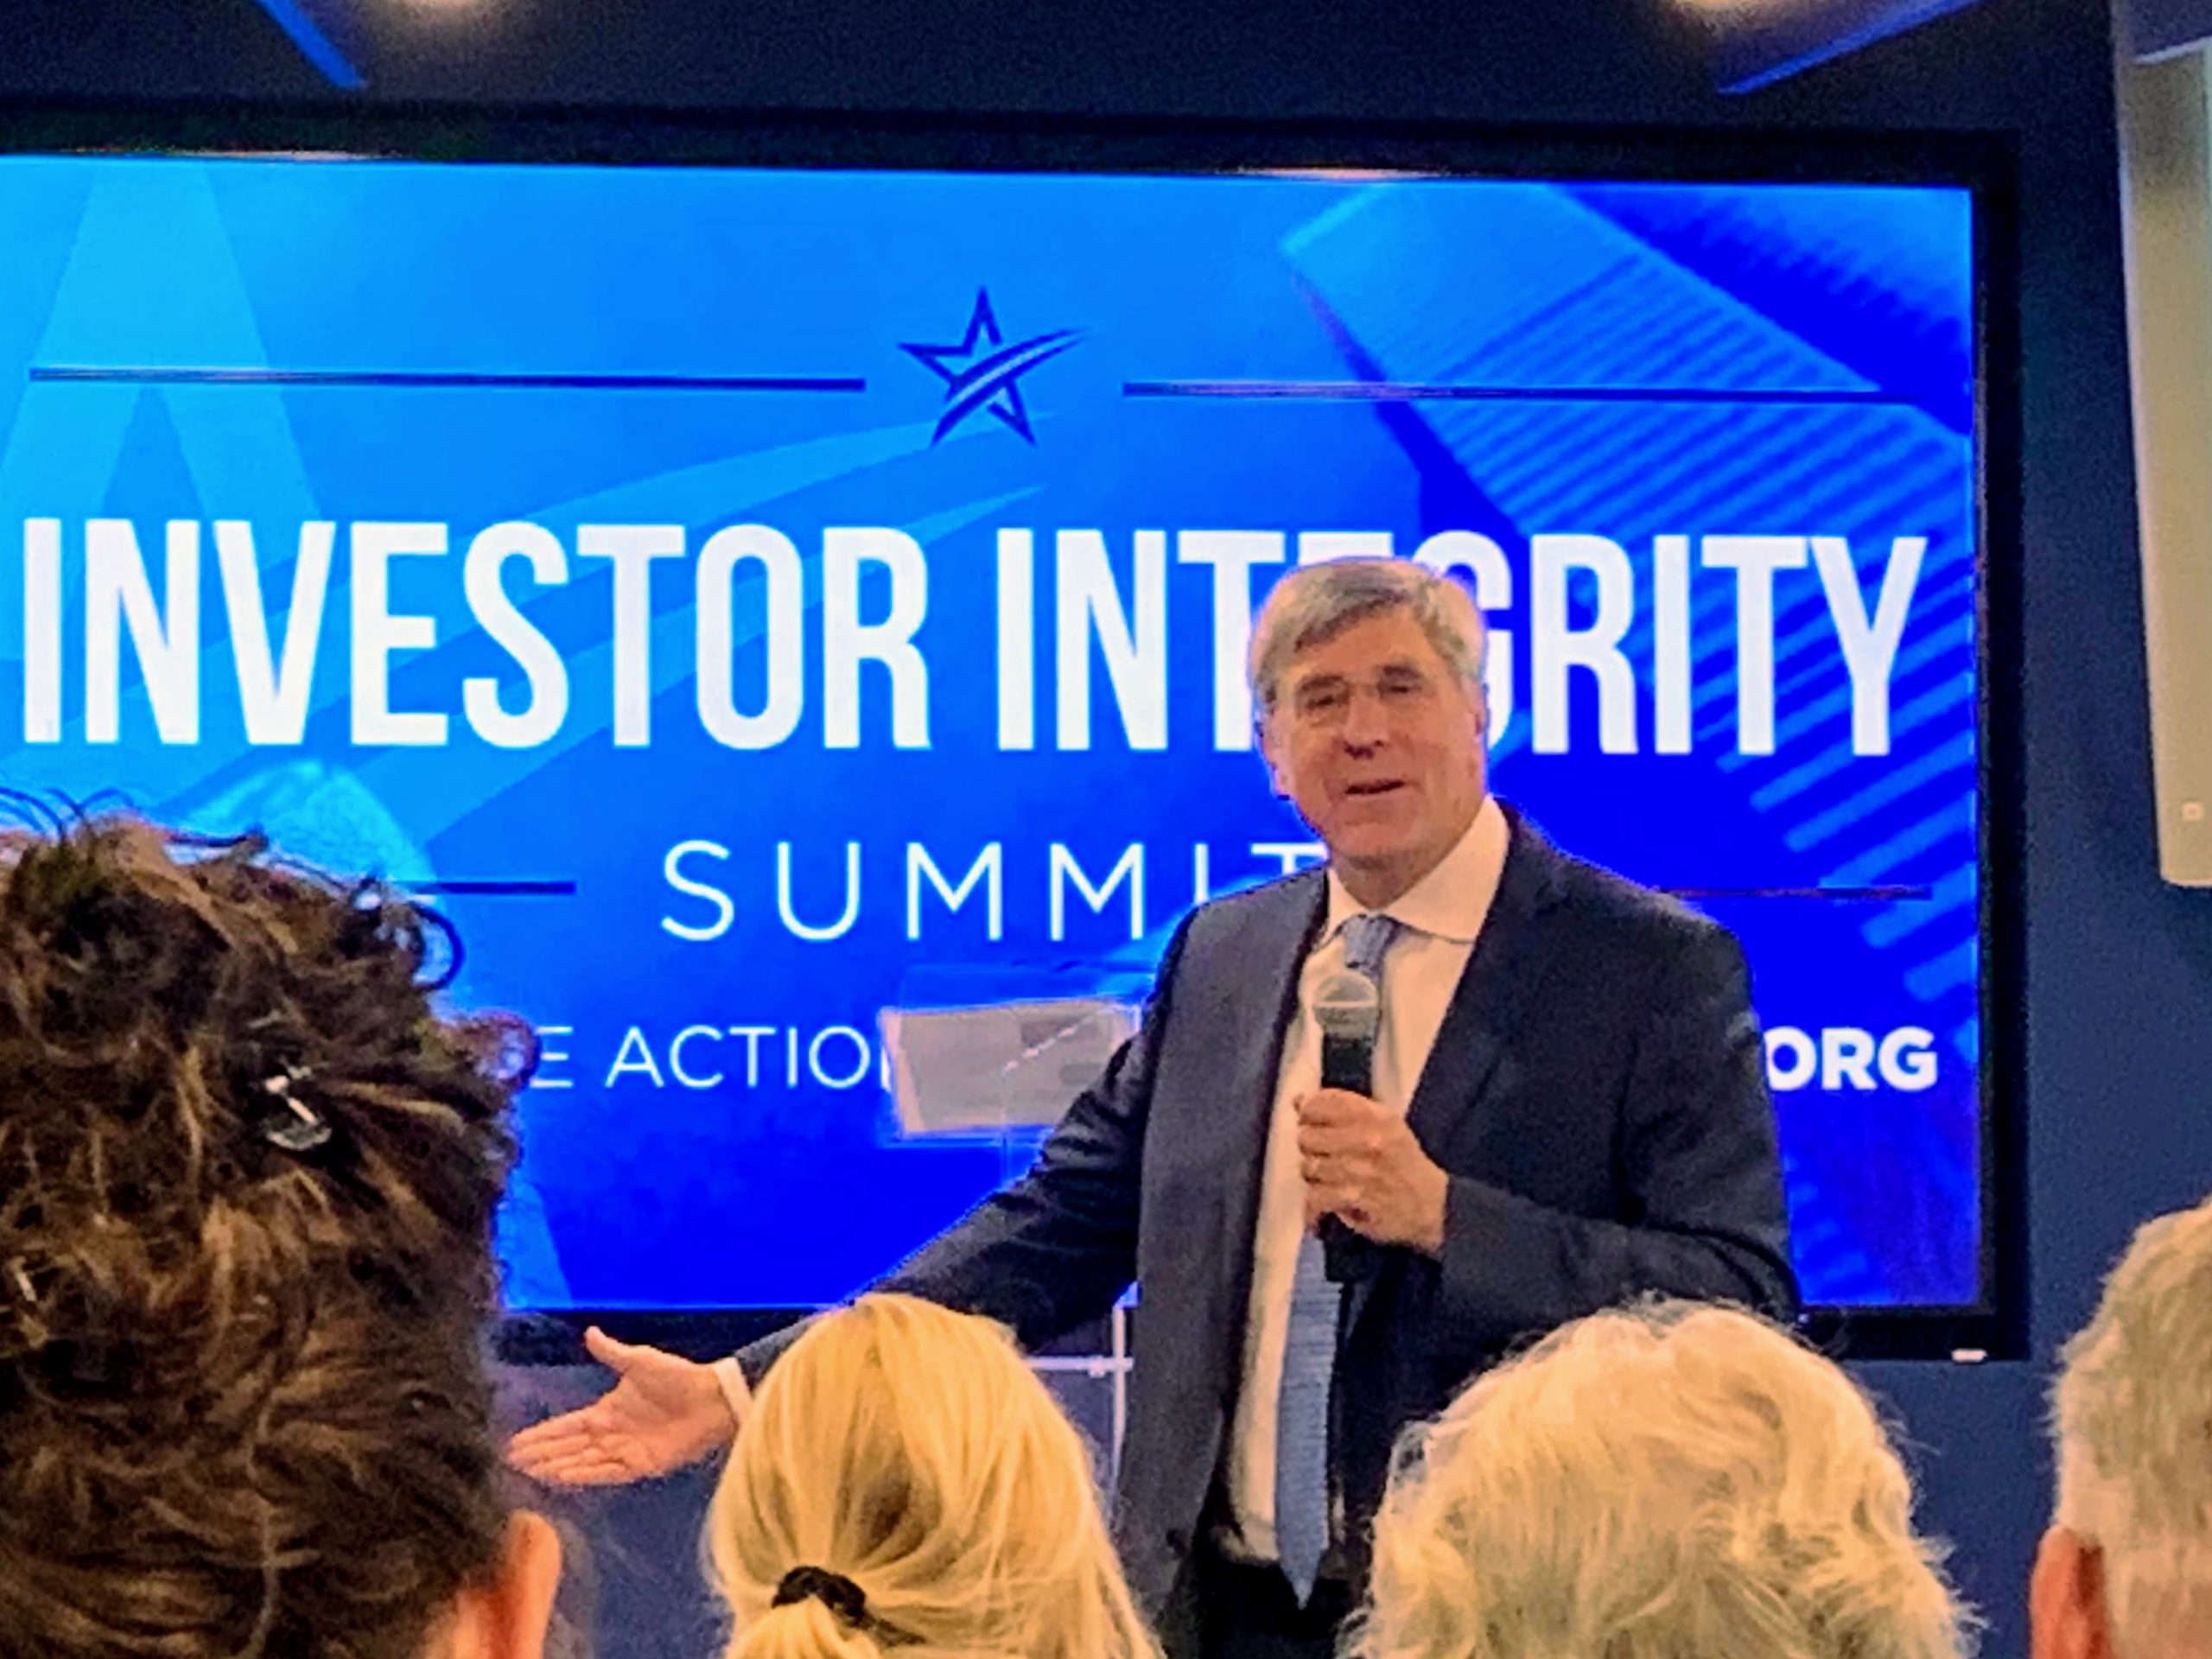 Settlement Project Representatives at FreedomWorks Summit on Investor Integrity